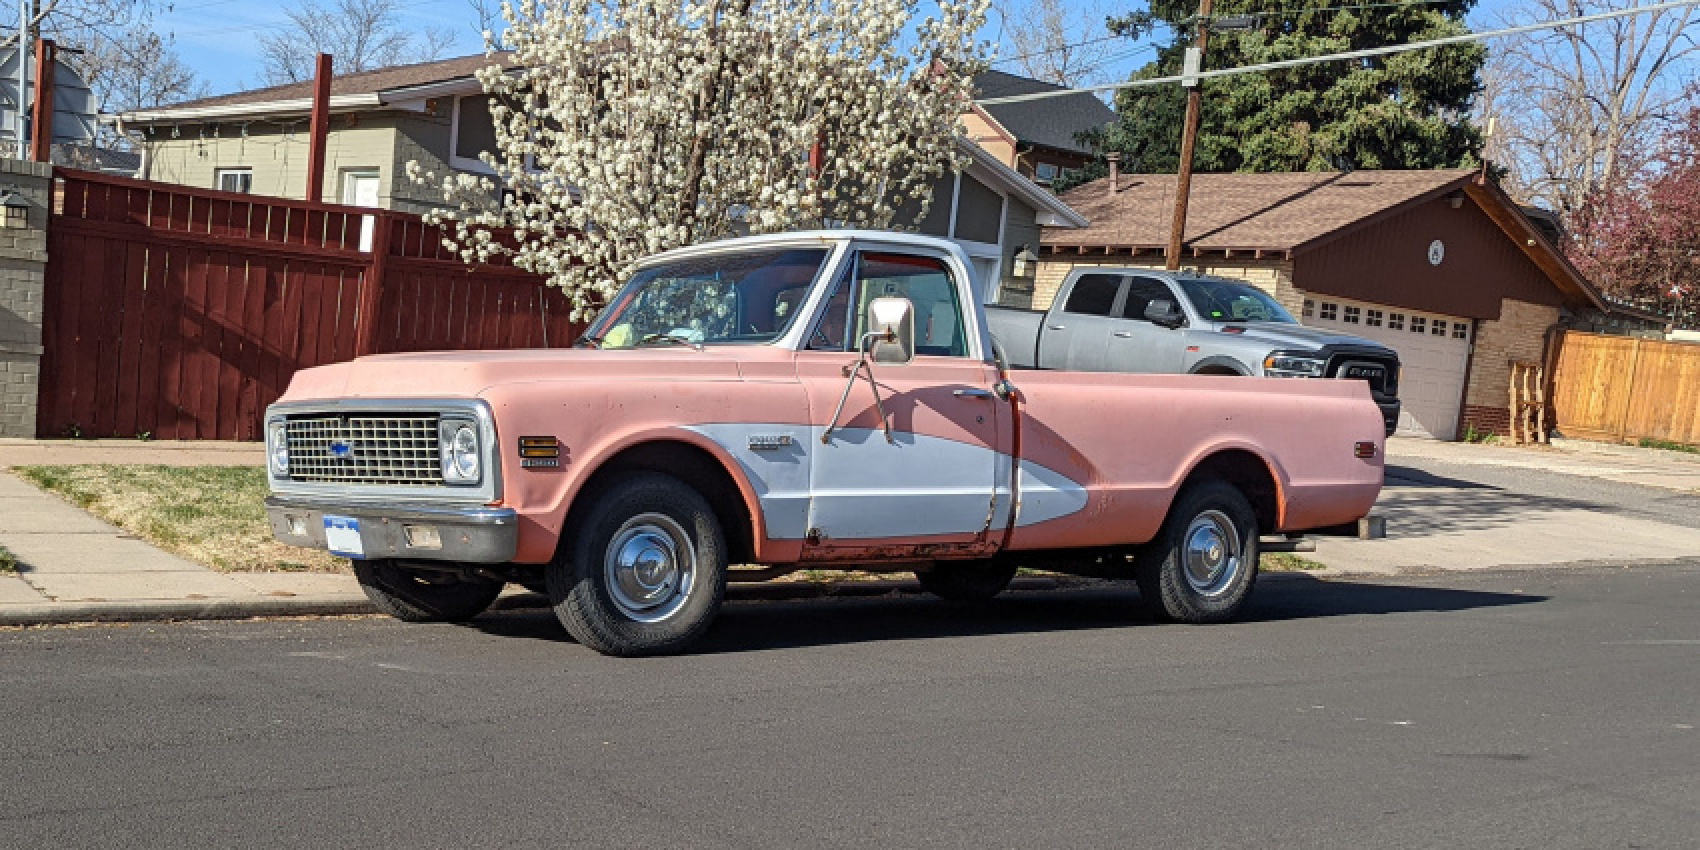 autos, car life, cars, chevrolet, classic cars, 1971 chevrolet c10 cheyenne super is down on the denver street